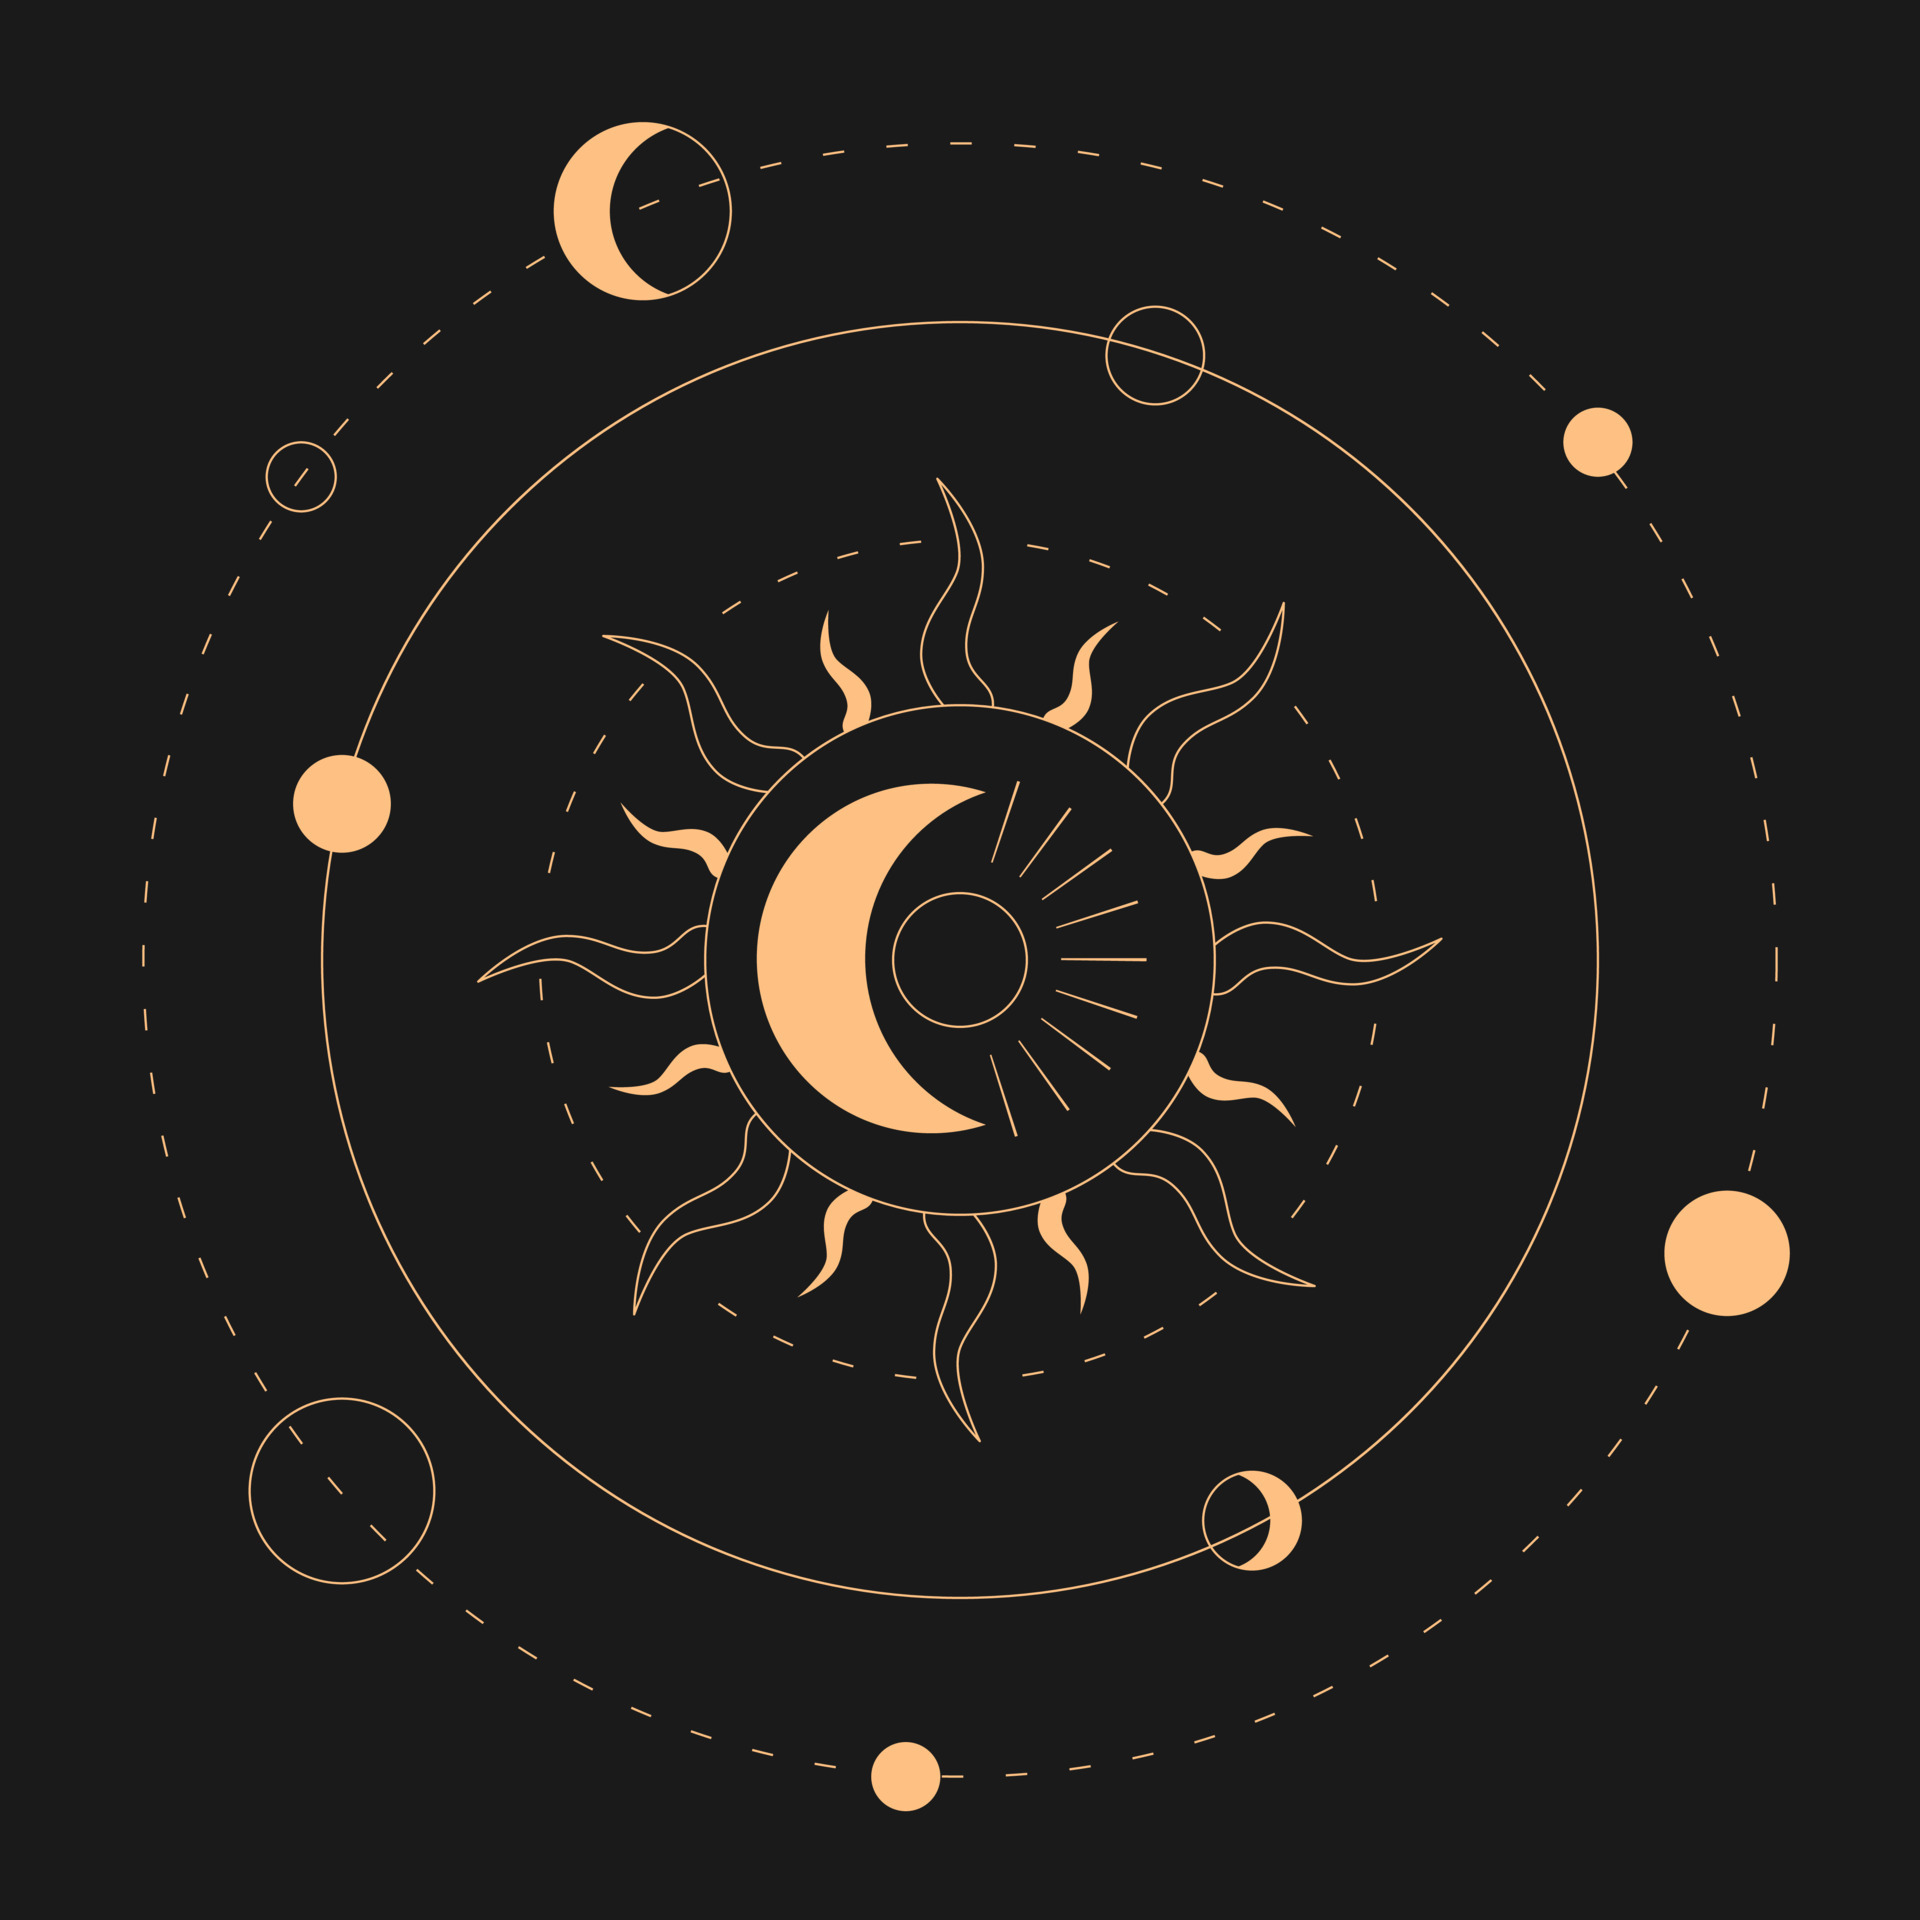 III. L'arrivée Celestial-sun-and-moon-magical-banner-for-astrology-celestial-alchemy-device-of-the-universe-crescent-sun-with-the-moon-and-planets-on-a-black-background-esoteric-illustration-vector